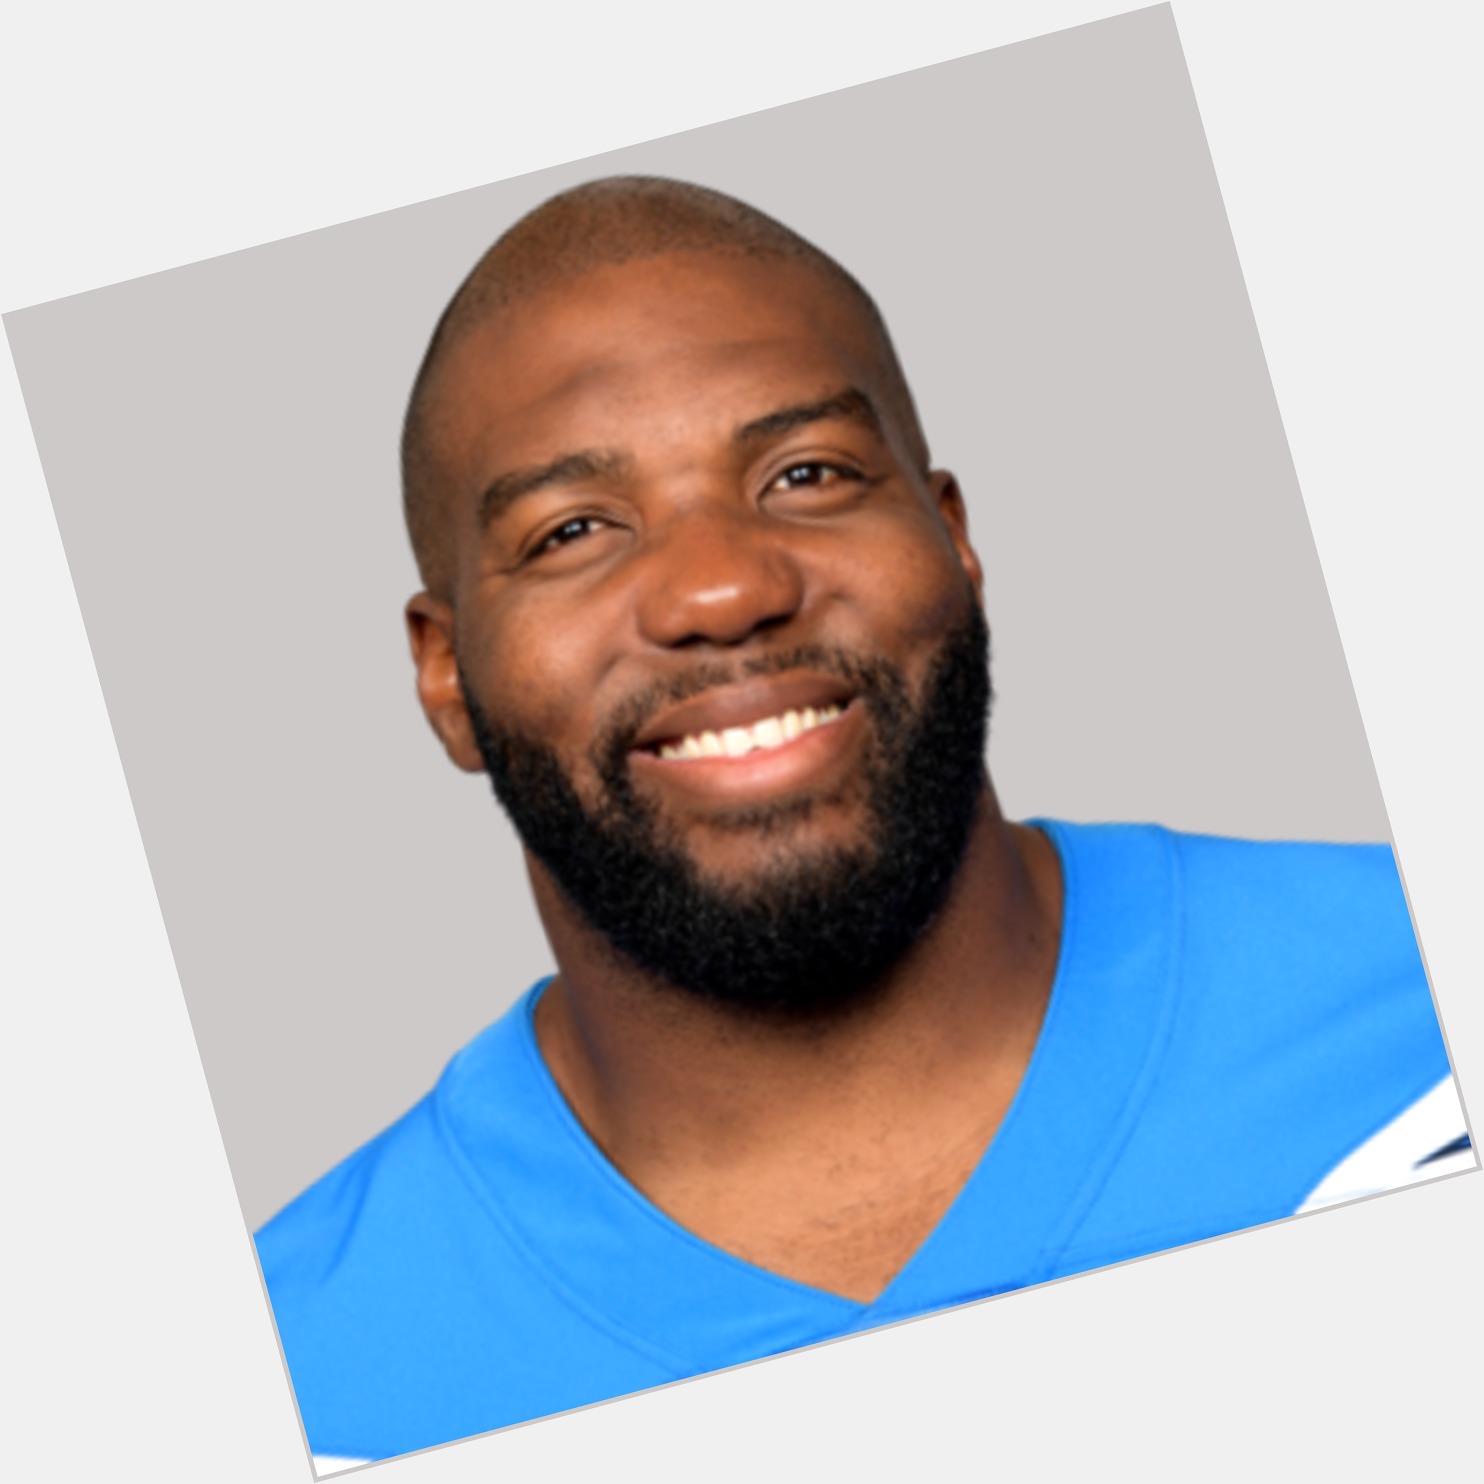 Https://fanpagepress.net/m/R/Russell Okung Dating 2